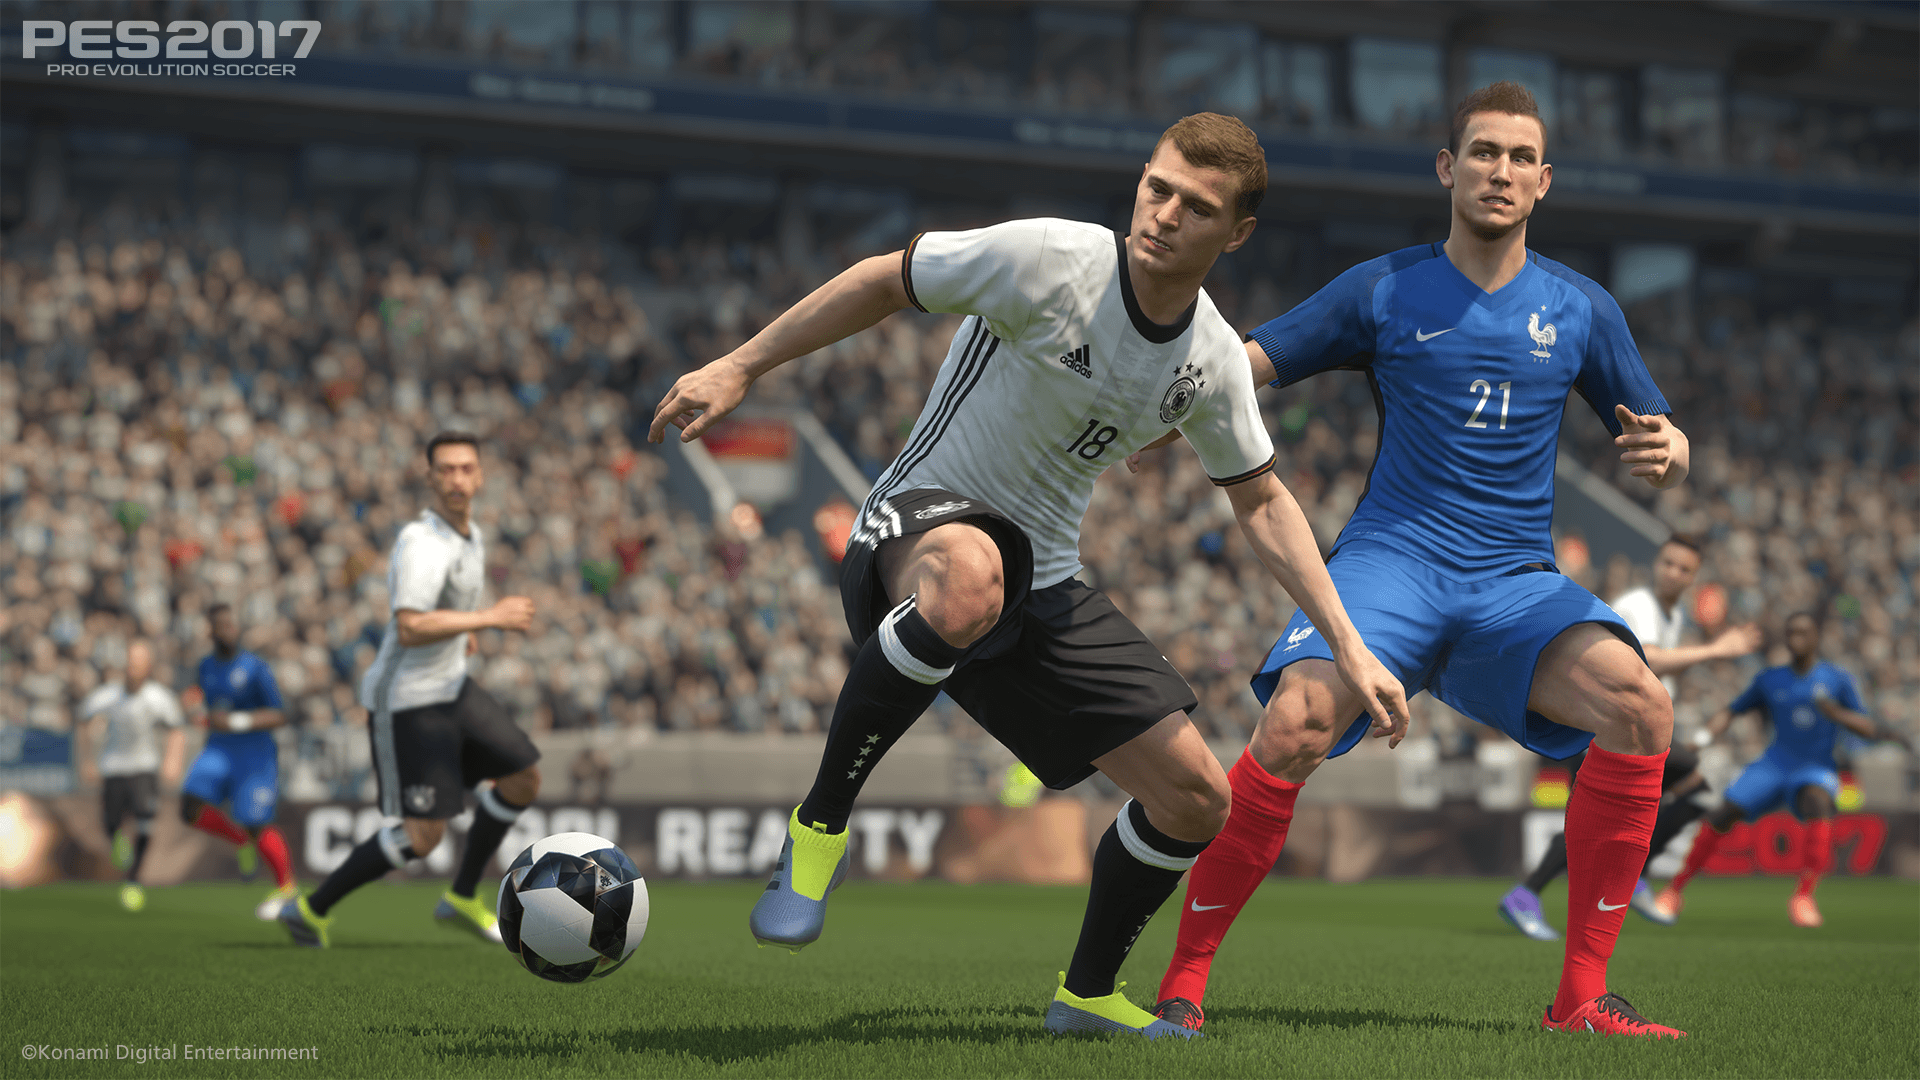 PES 2017 Seeks to Become the Most Realistic Soccer Game Ever